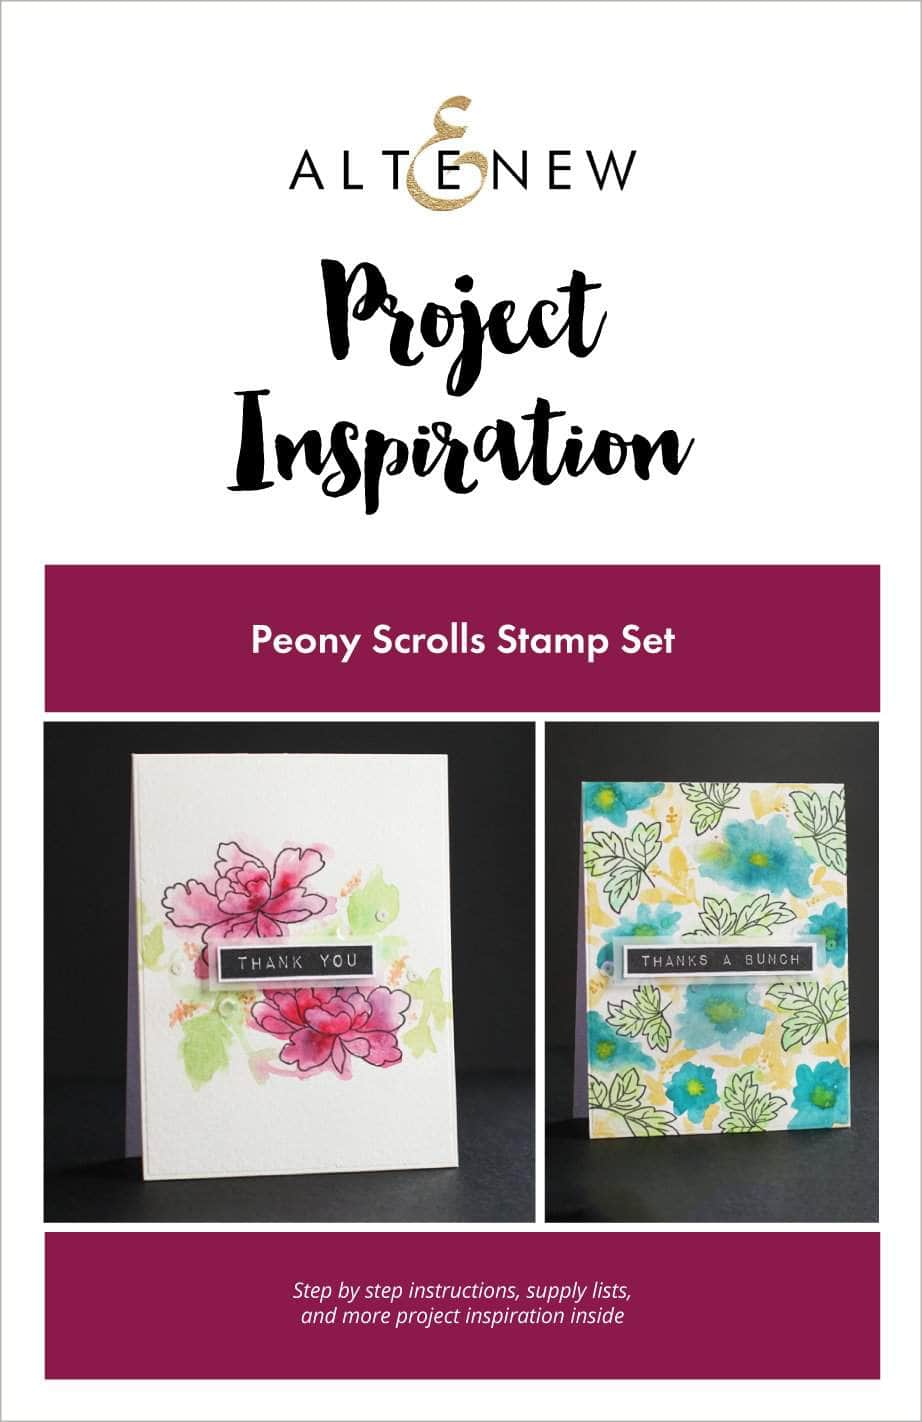 Printed Media Peony Scrolls Project Inspiration Guide